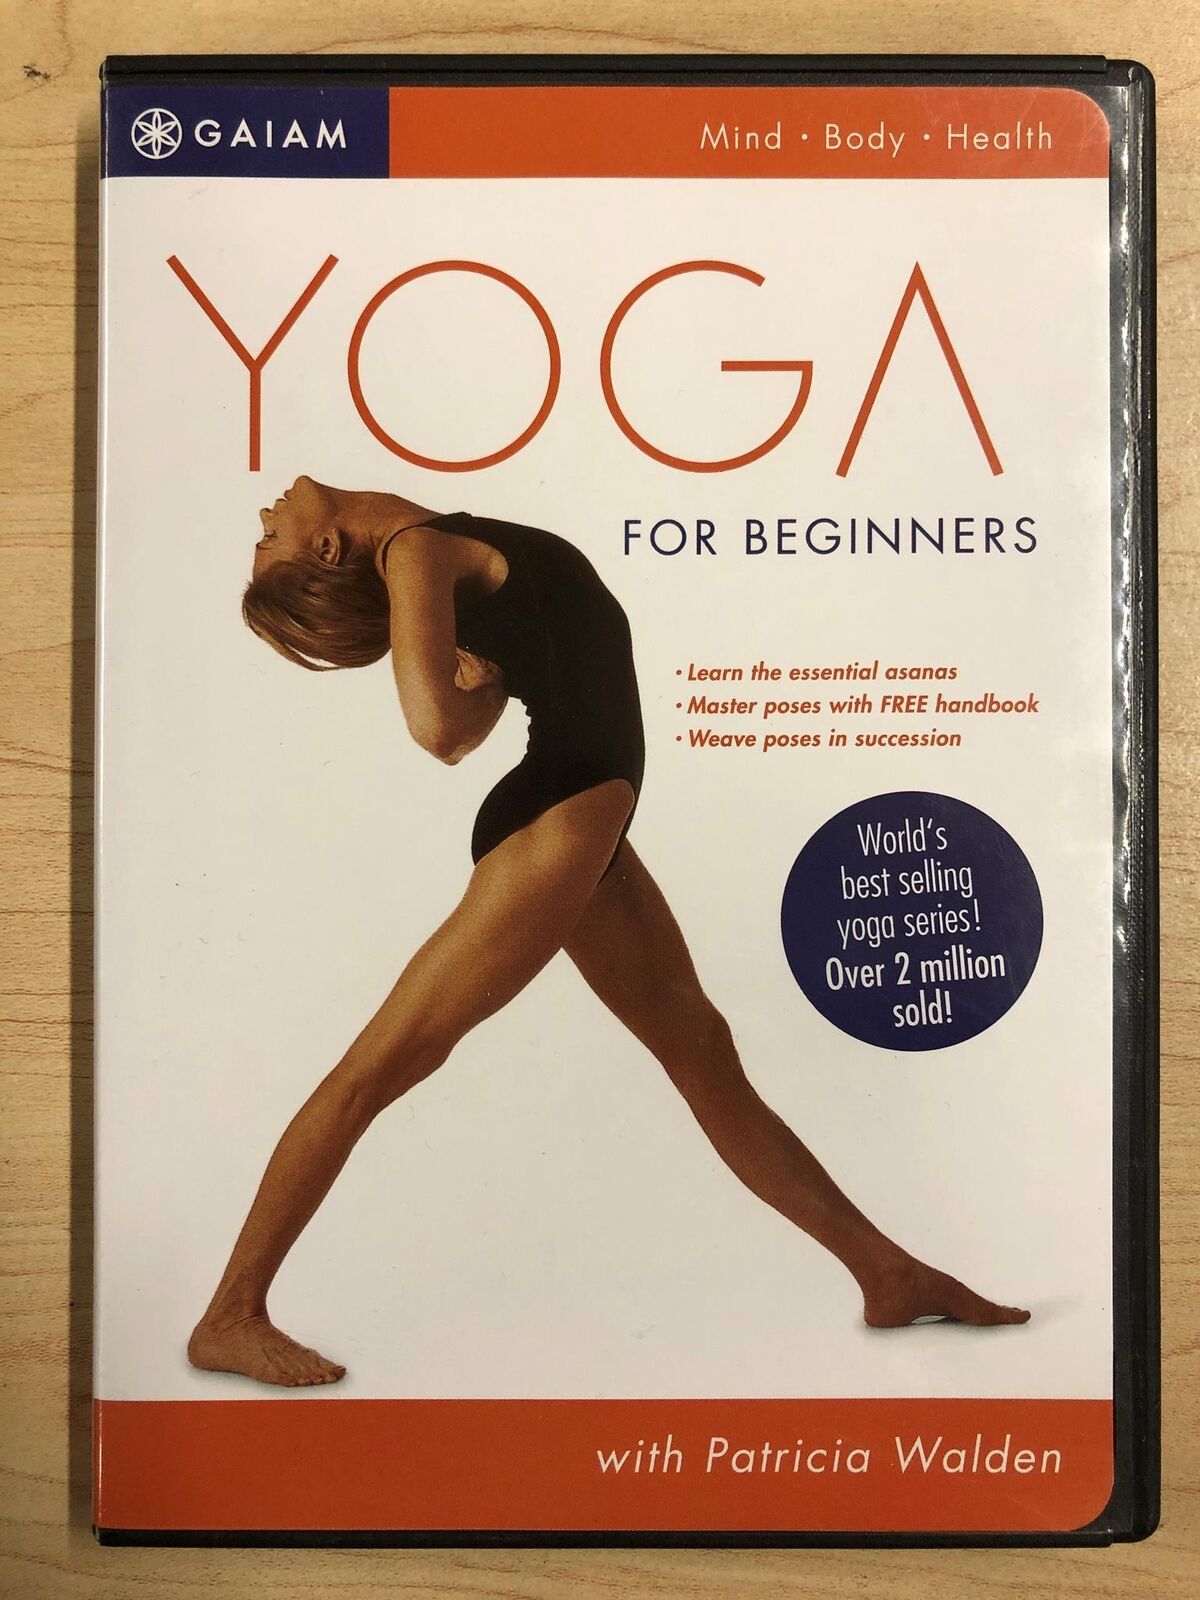 Yoga for Beginners - Patricia Walden (DVD, exercise, Gaiam) - J0205